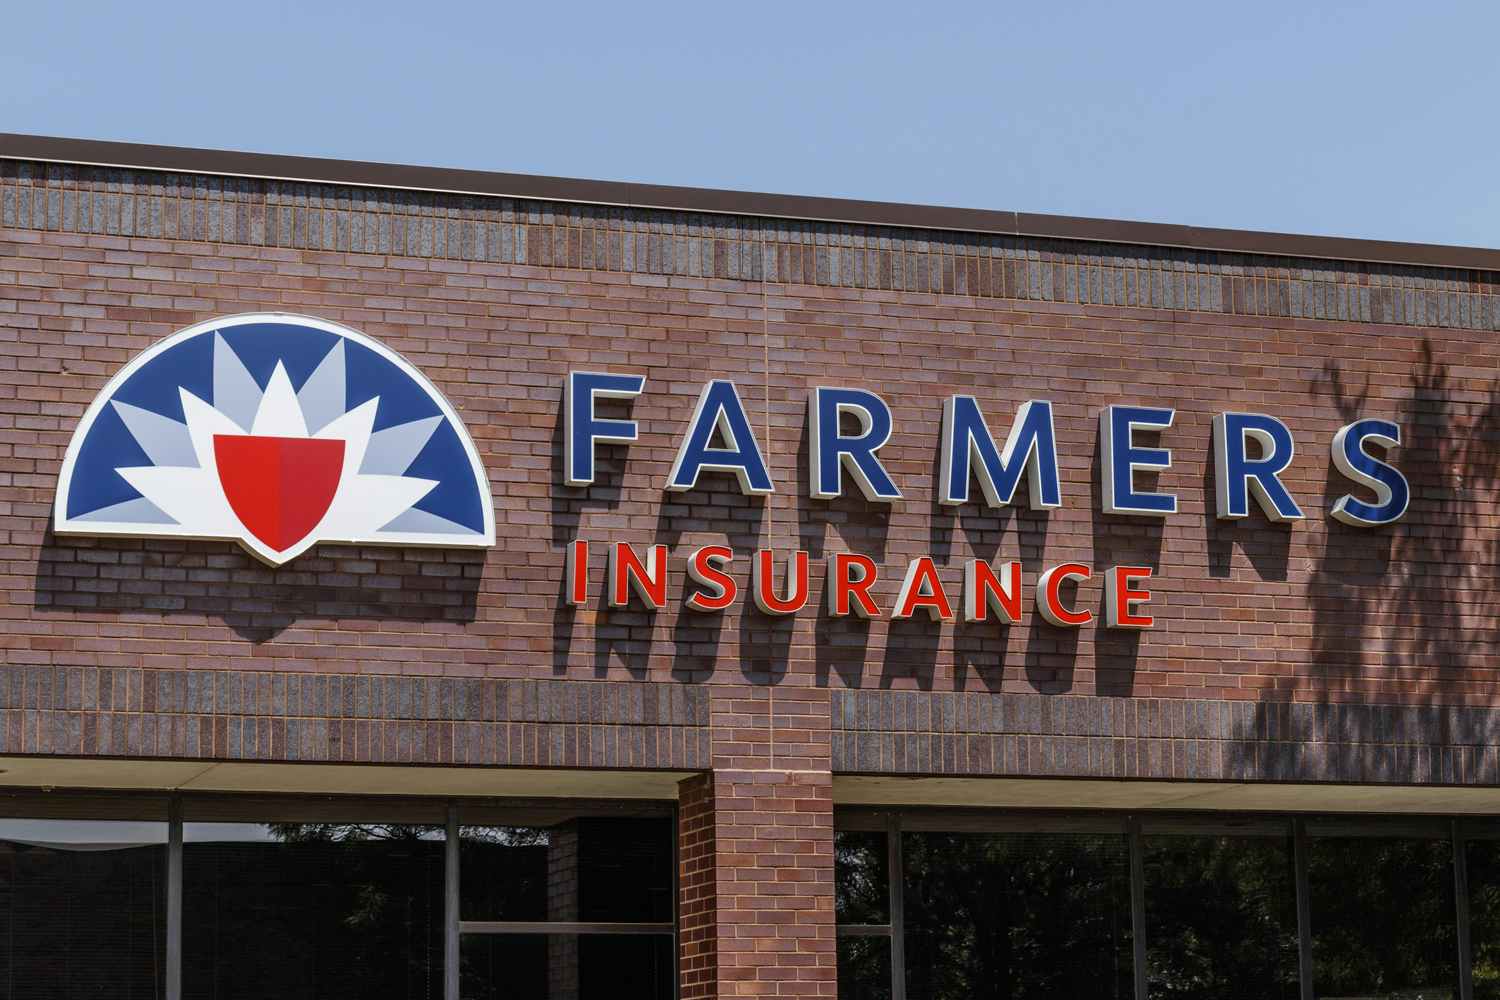 A farmers insurance business sign.